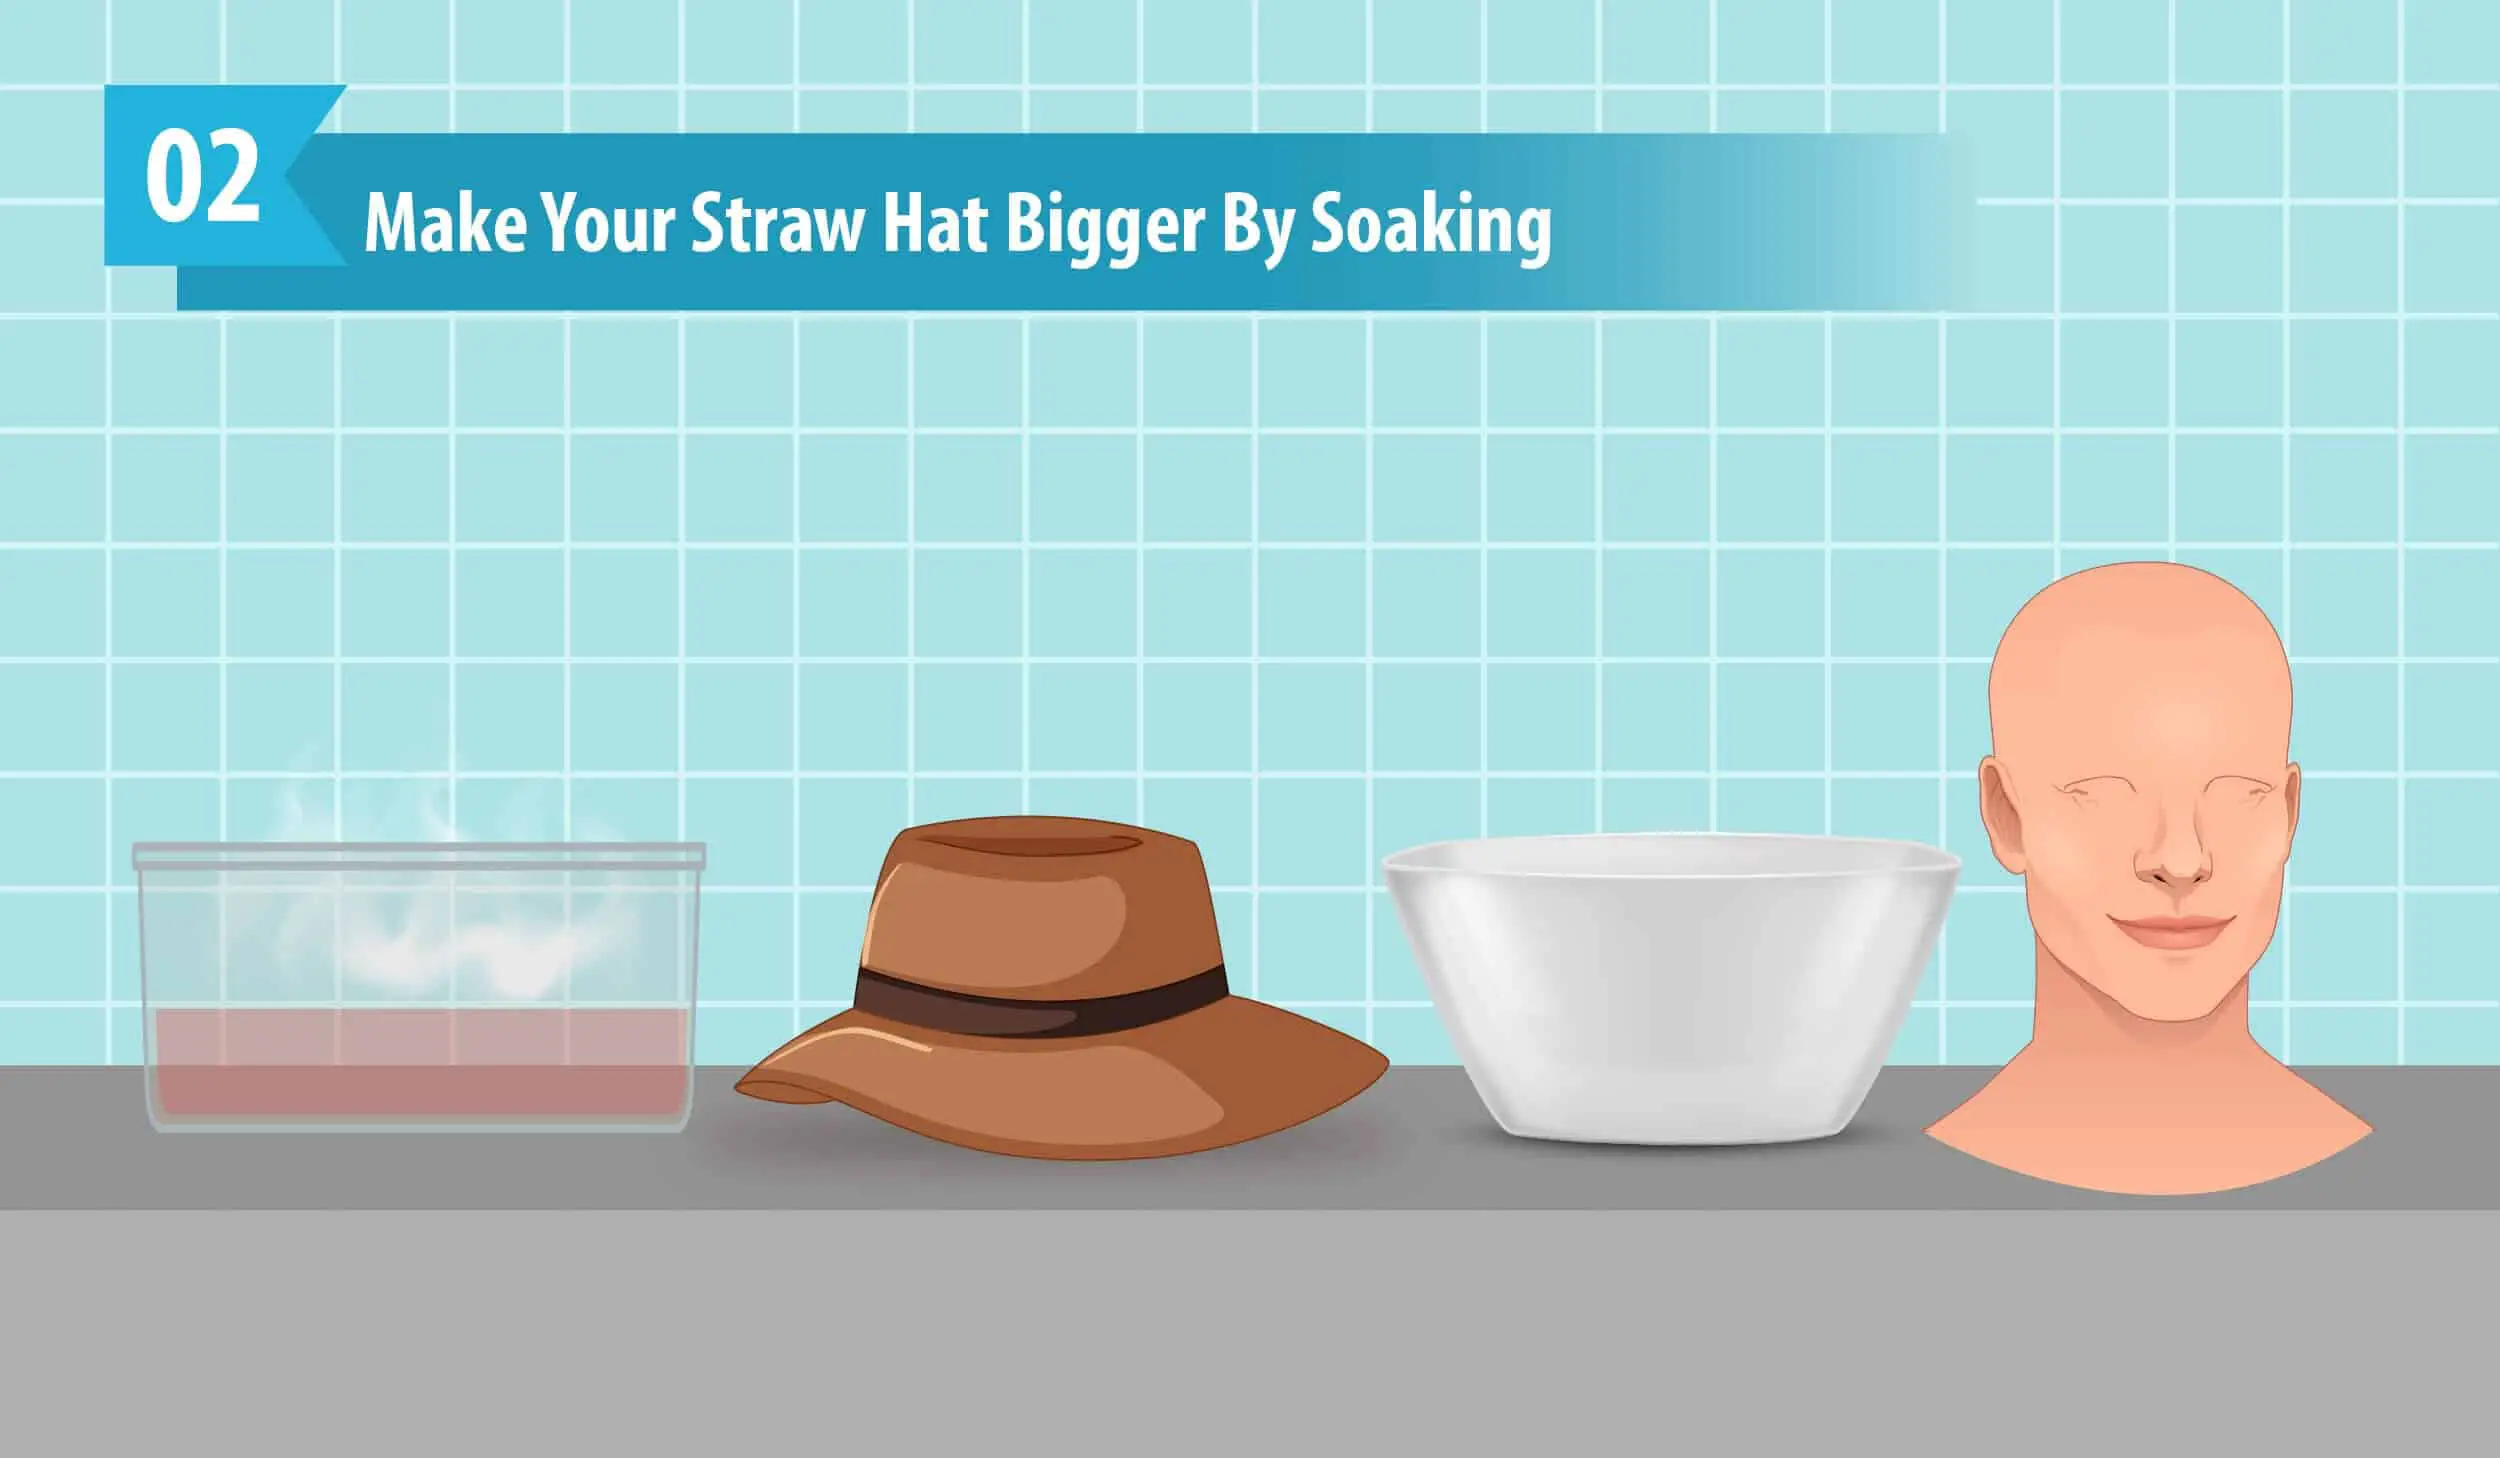 Make Your Straw Hat Bigger By Soaking